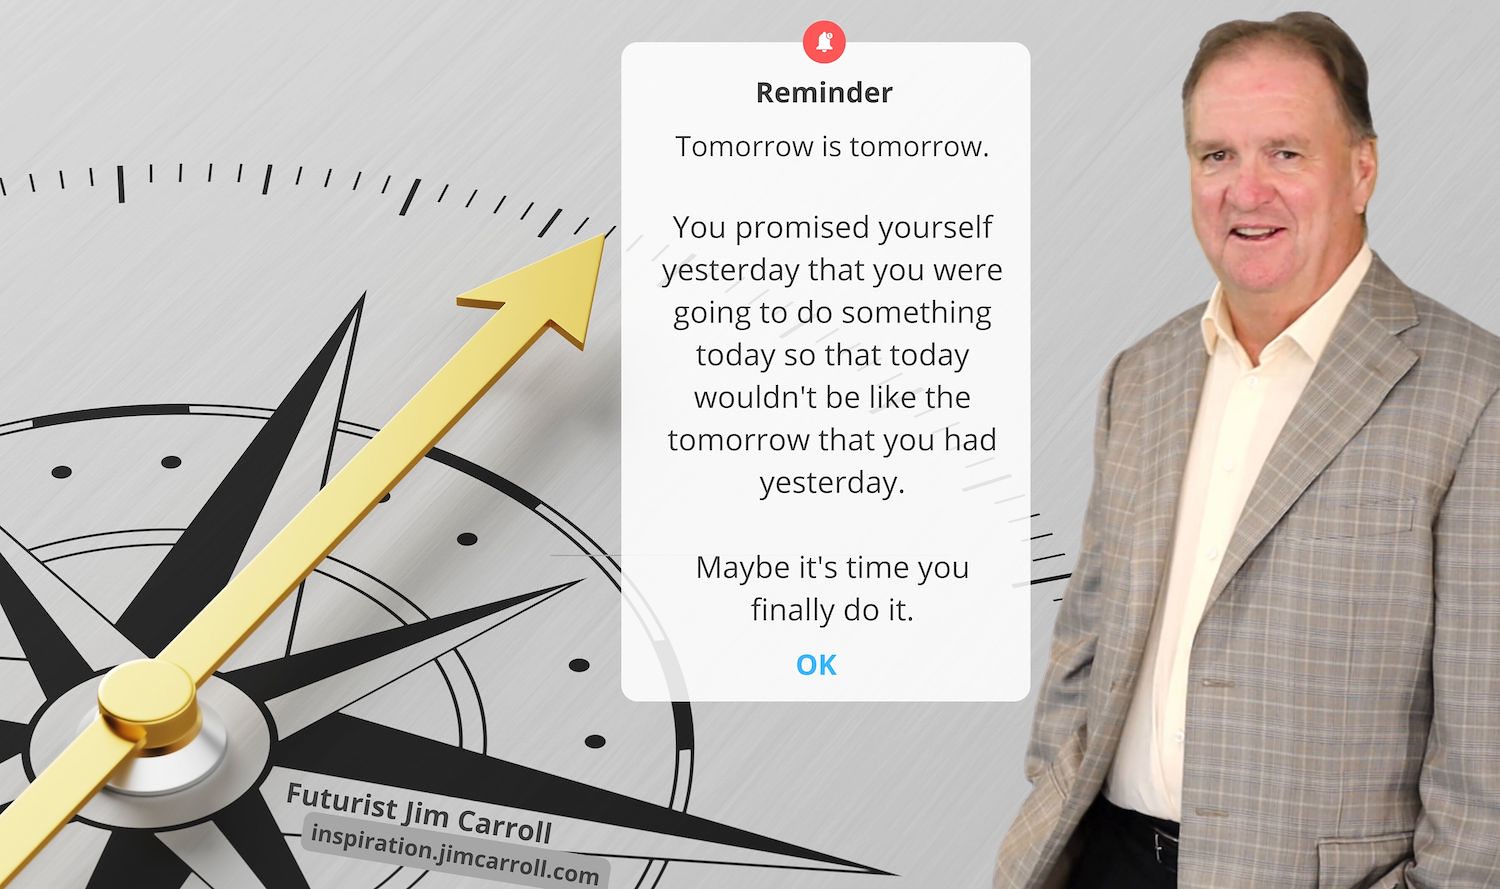 "Tomorrow is tomorrow. You promised yourself yesterday that you were going to do something today so that today wouldn't be like the tomorrow that you had yesterday. Maybe it's time you finally do it." - Futurist Jim Carroll